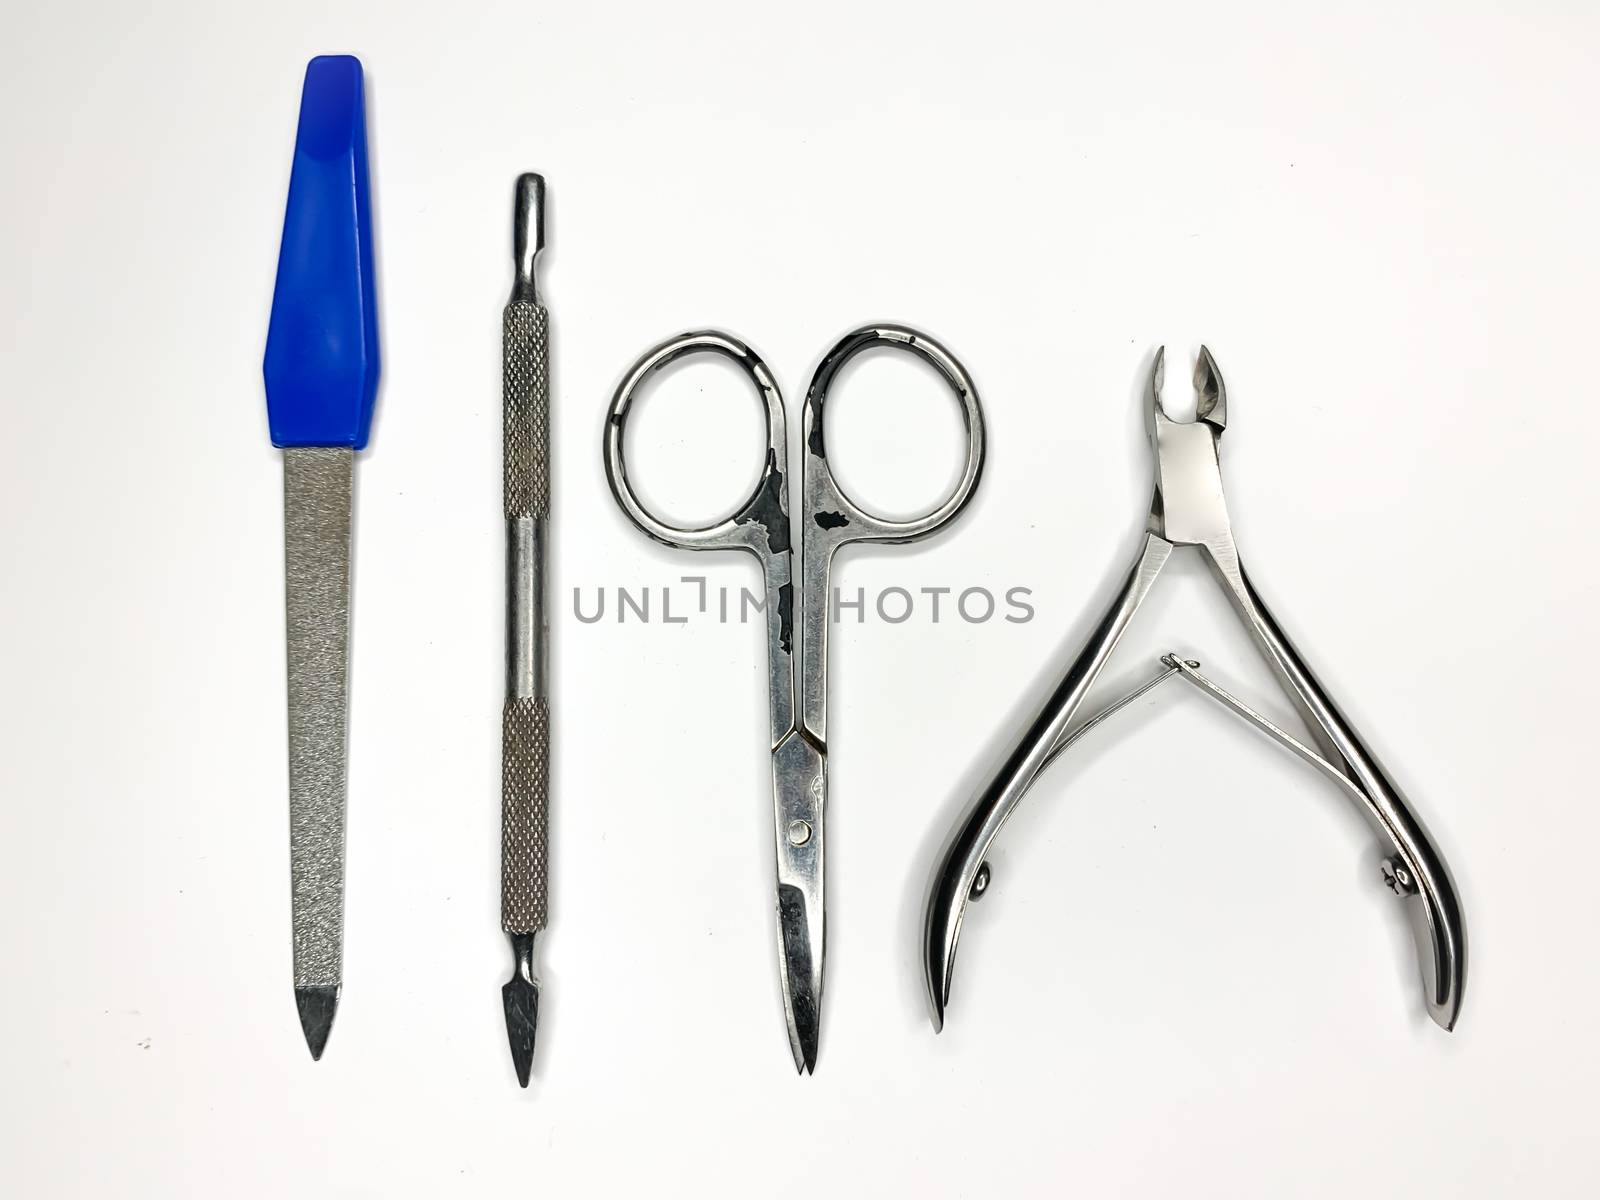 Manicure pedicure tools set nail care top view on a white background